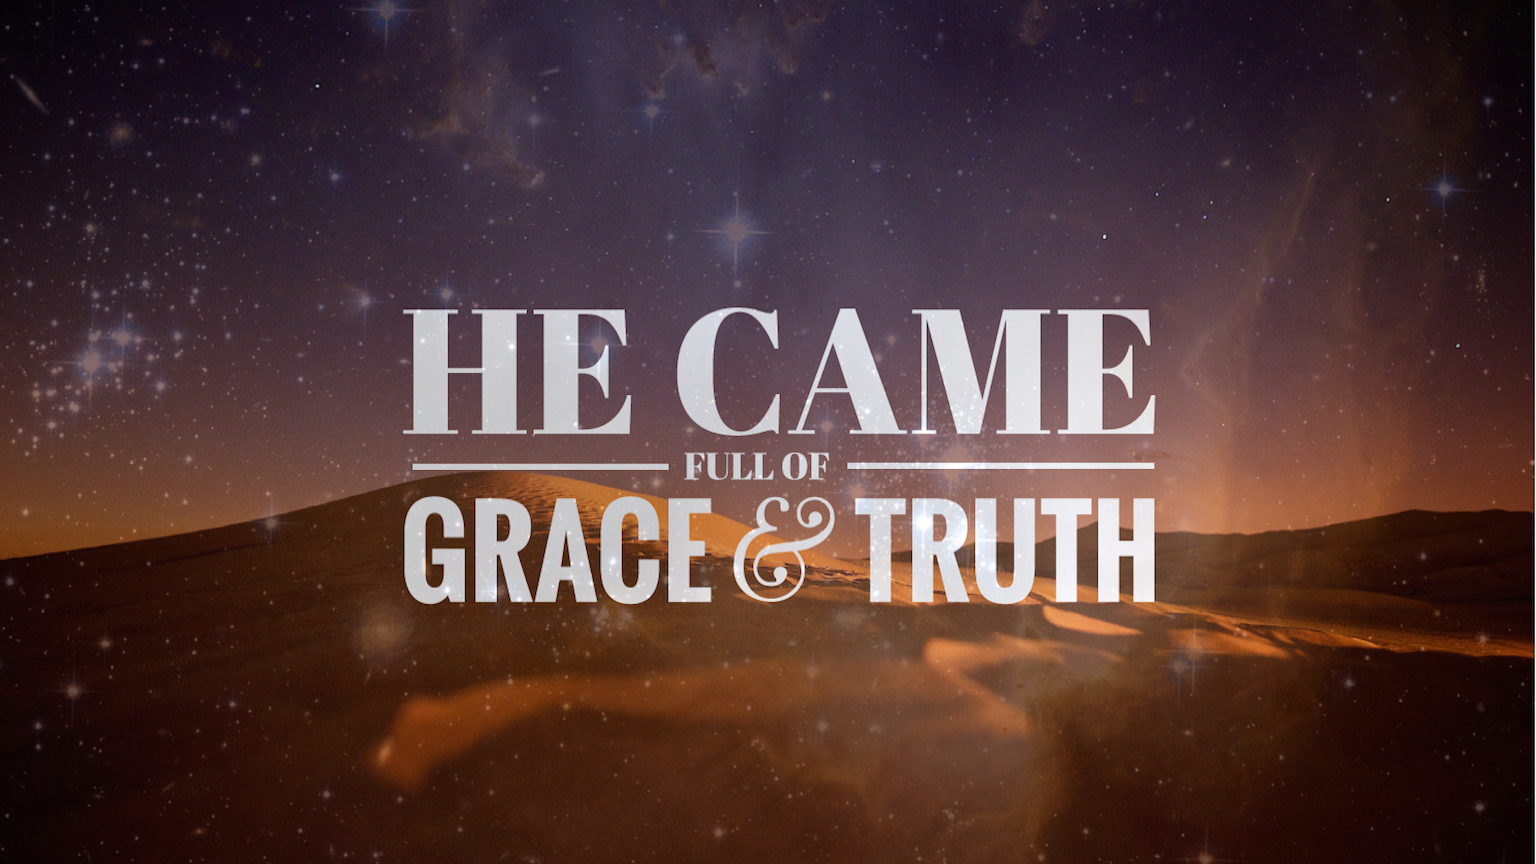 Truth and Grace